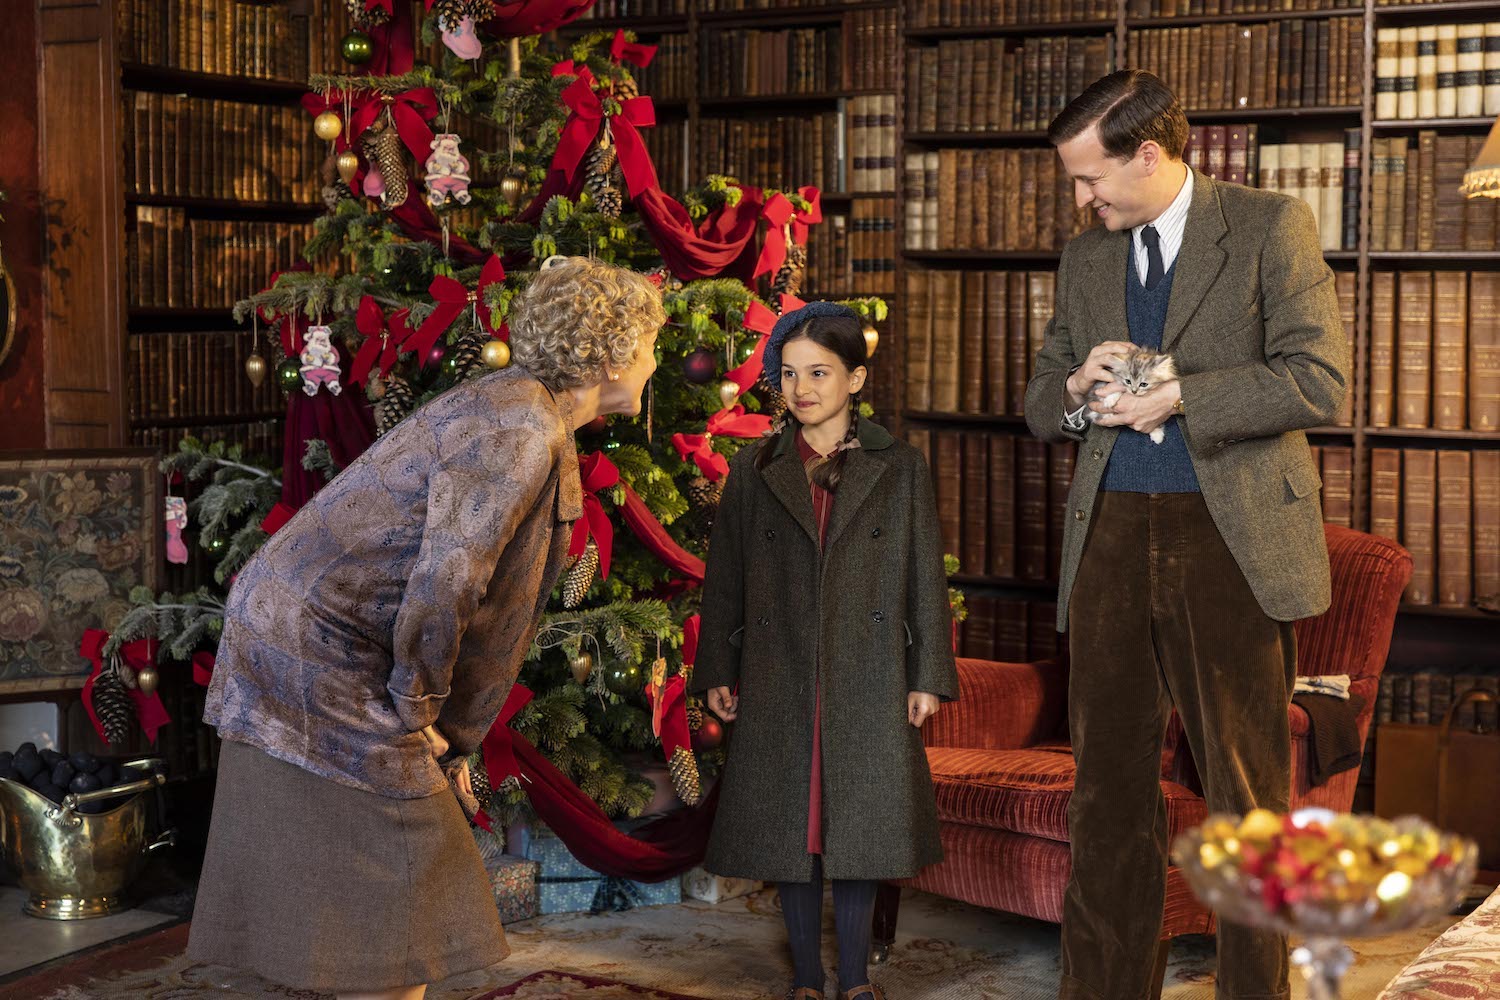 In an opulent book-lined room, Mrs. Pumphrey (Patricia Hodge) talks to Eva (Ella Bernstein) while James holds a small gray kitten. The room is decorated for Christmas